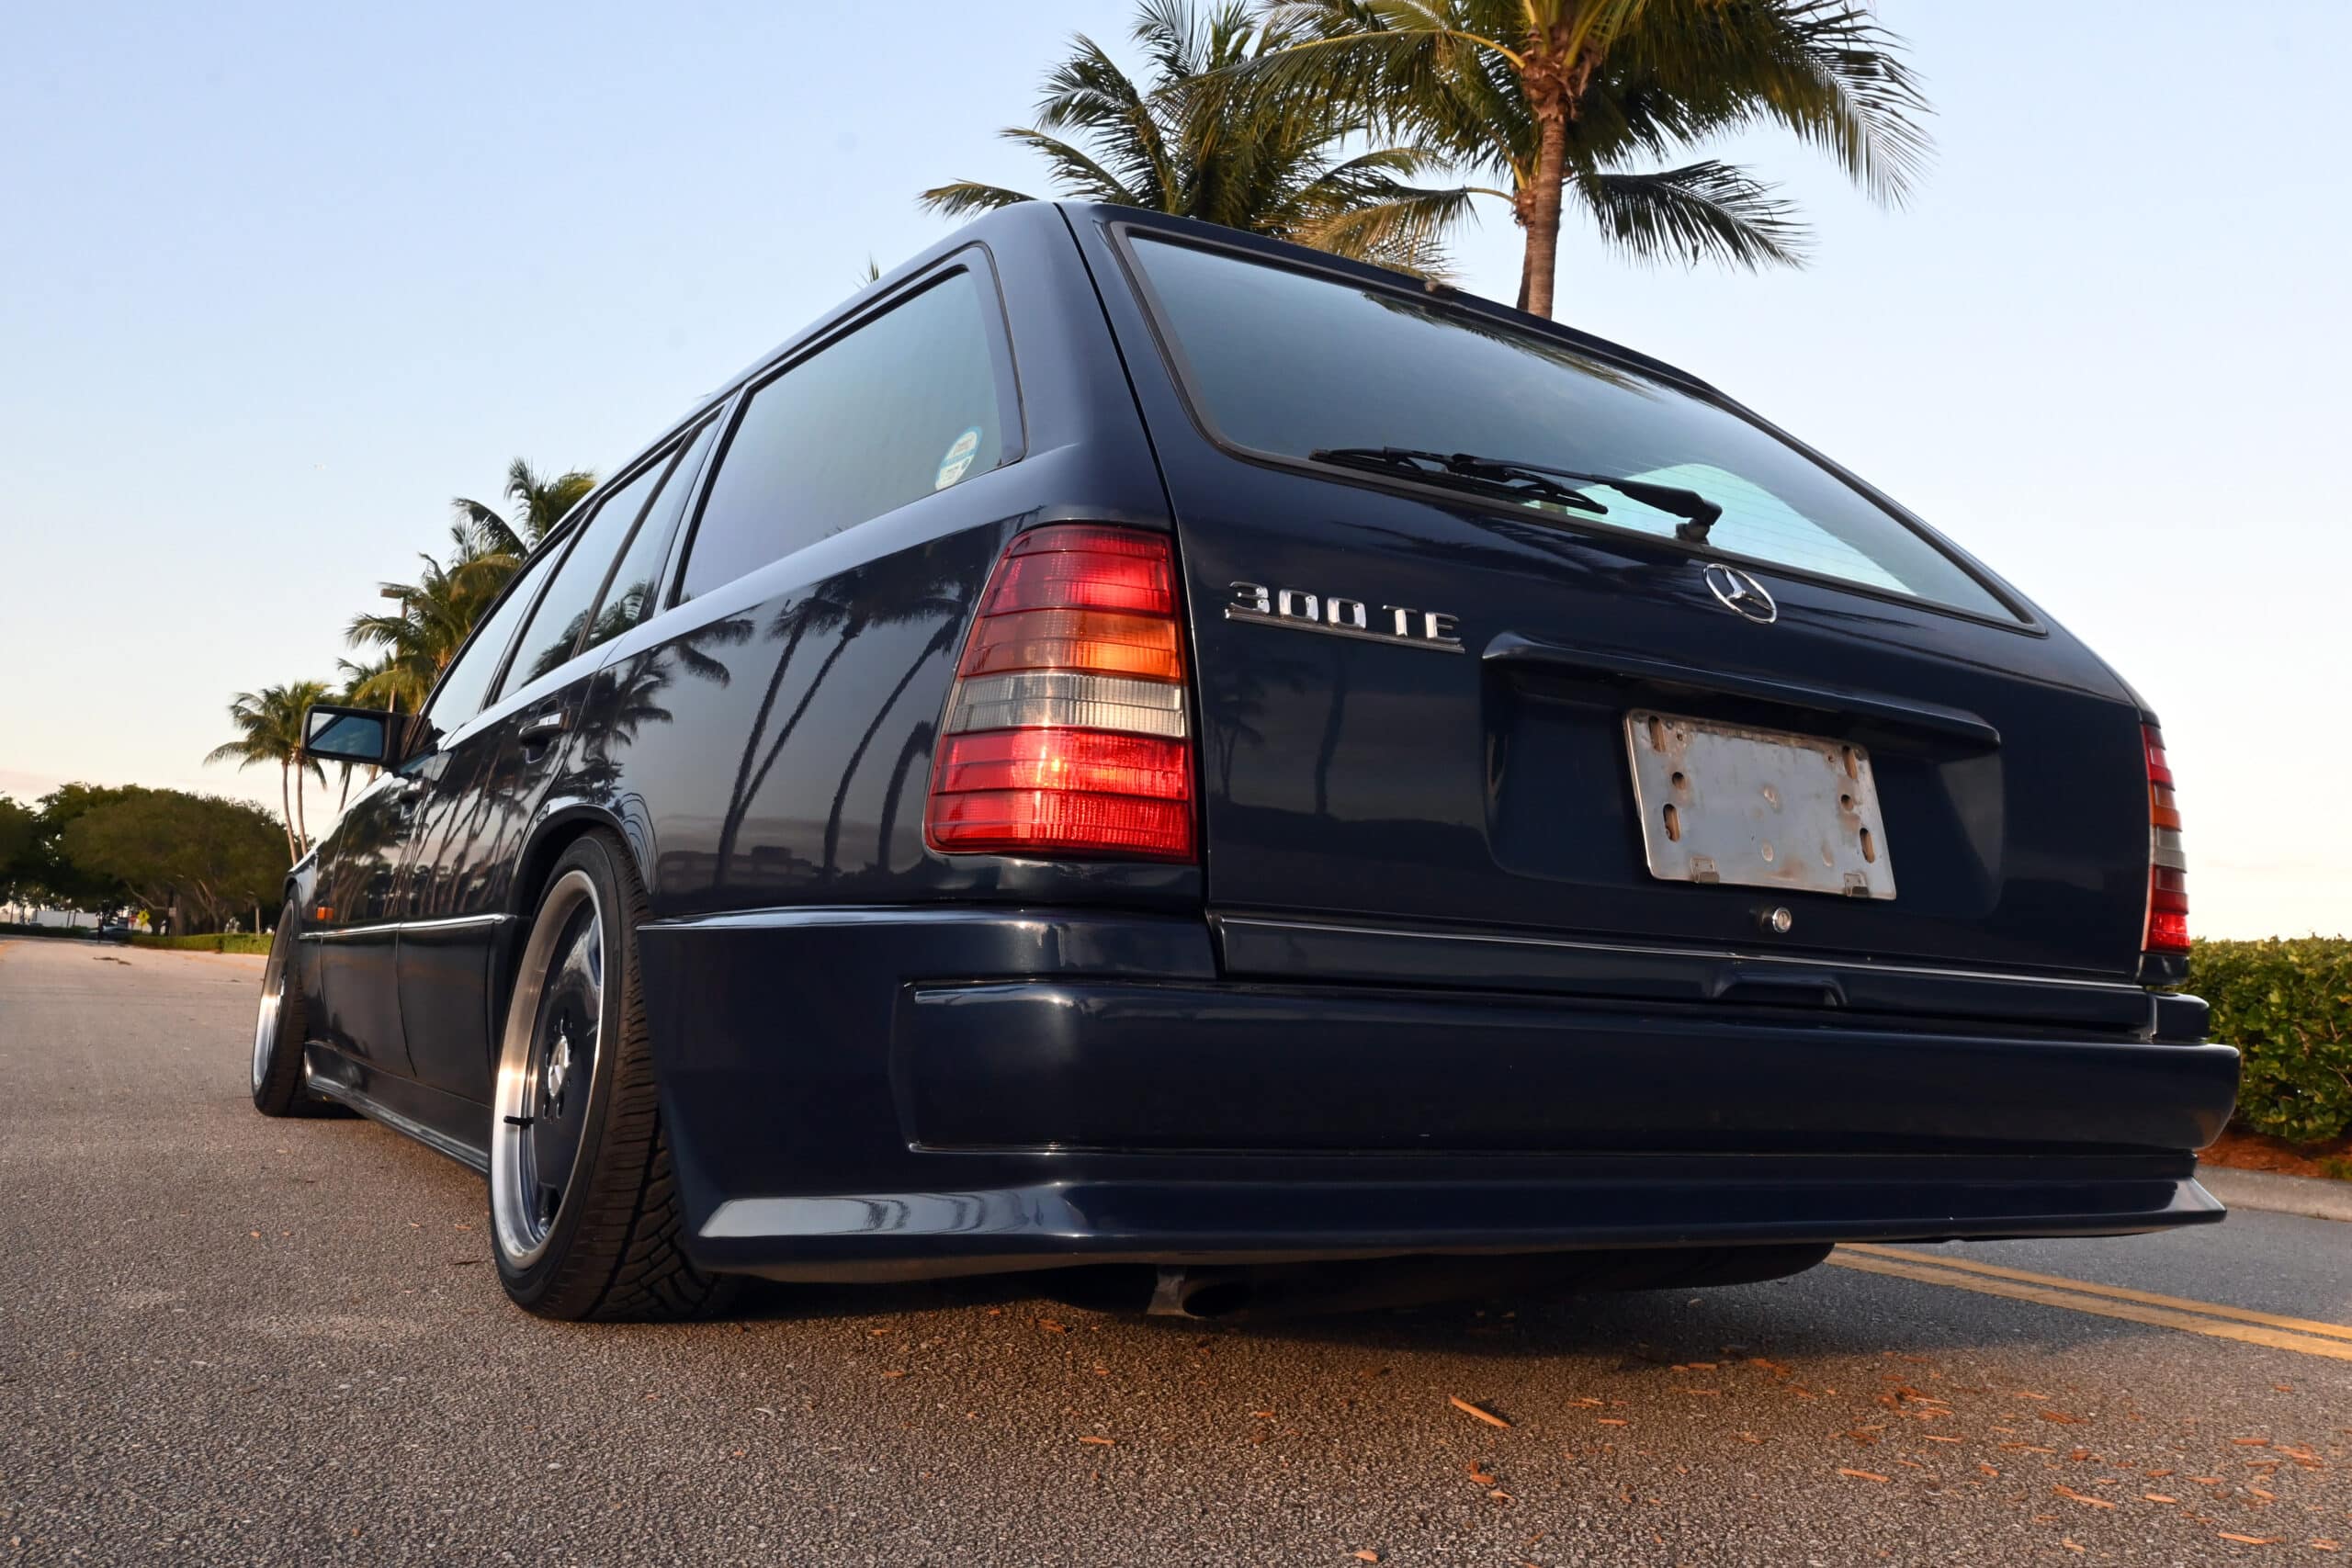 1991 Mercedes 300TE, Rare Nautical Blue, AMG wheels, Body with AMG styling, fresh Coilover suspension, slick top, rust free